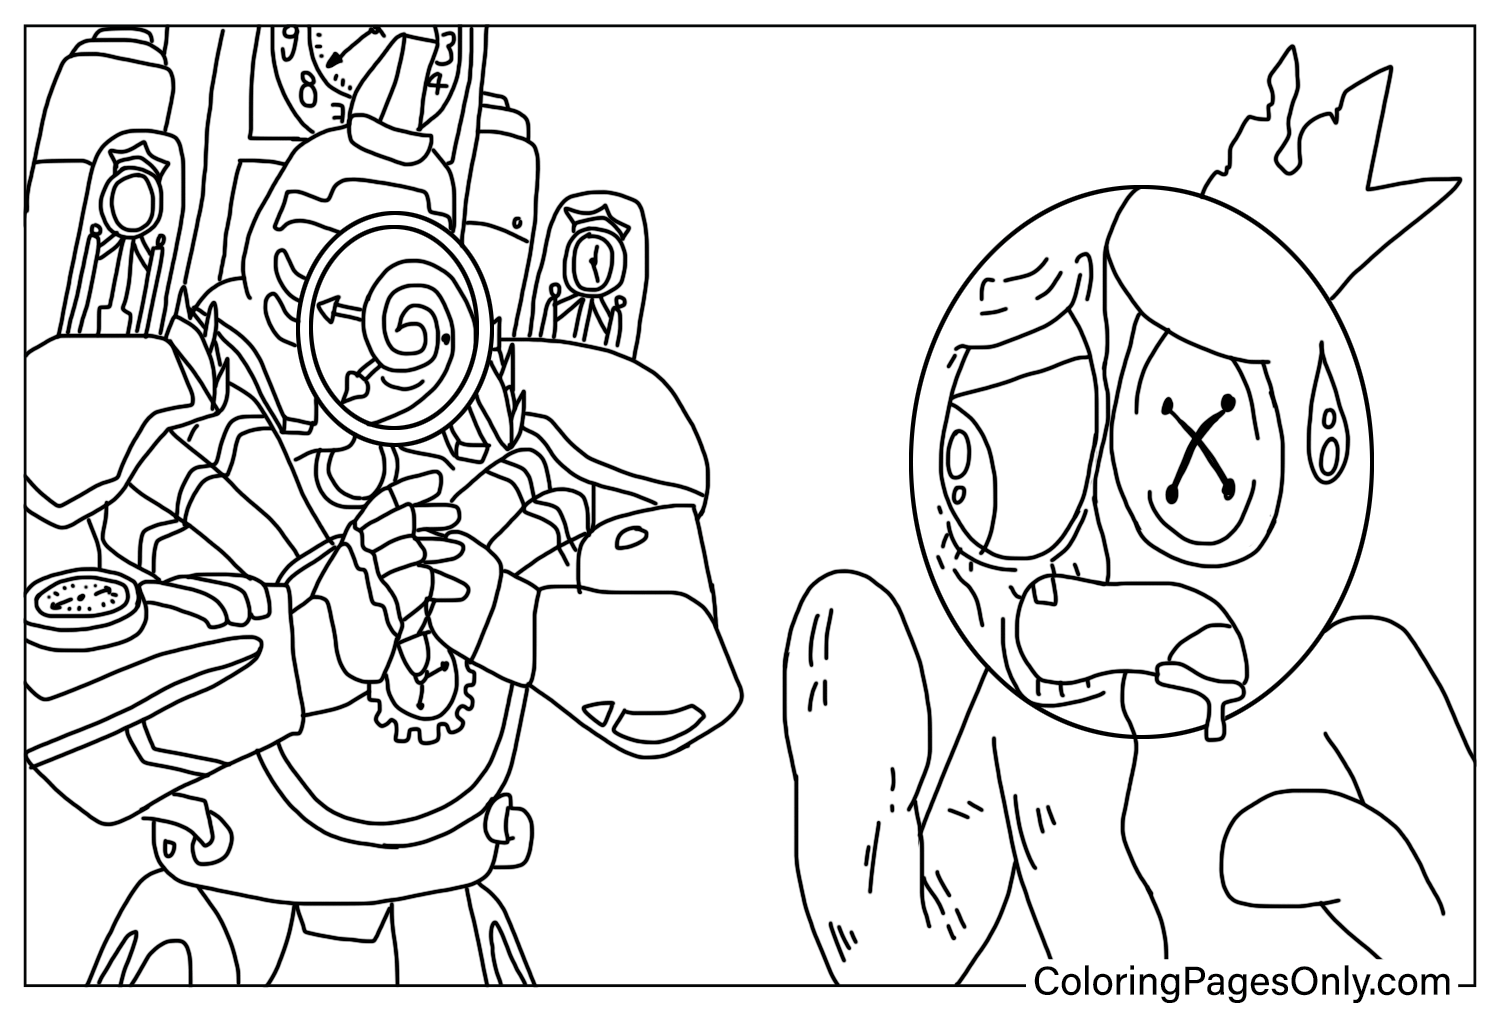 Titan ClockMan and Blue Coloring Pages from Titan Clock Man